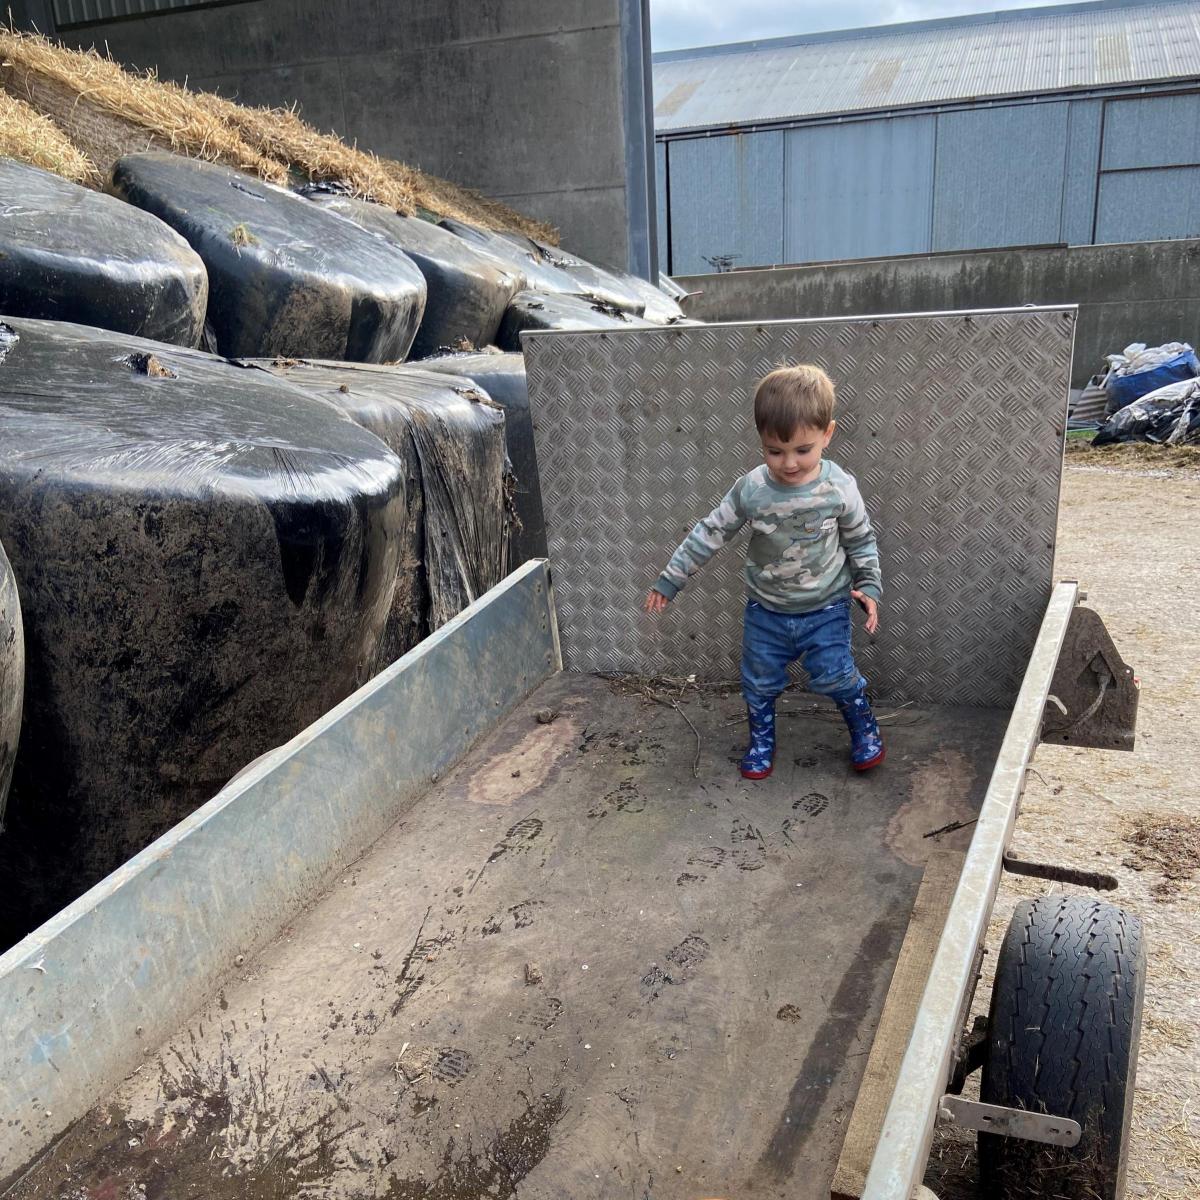 Lindsey Armstrong (Barleith Farm) - Alex (22months) loves running into any puddle he can find.